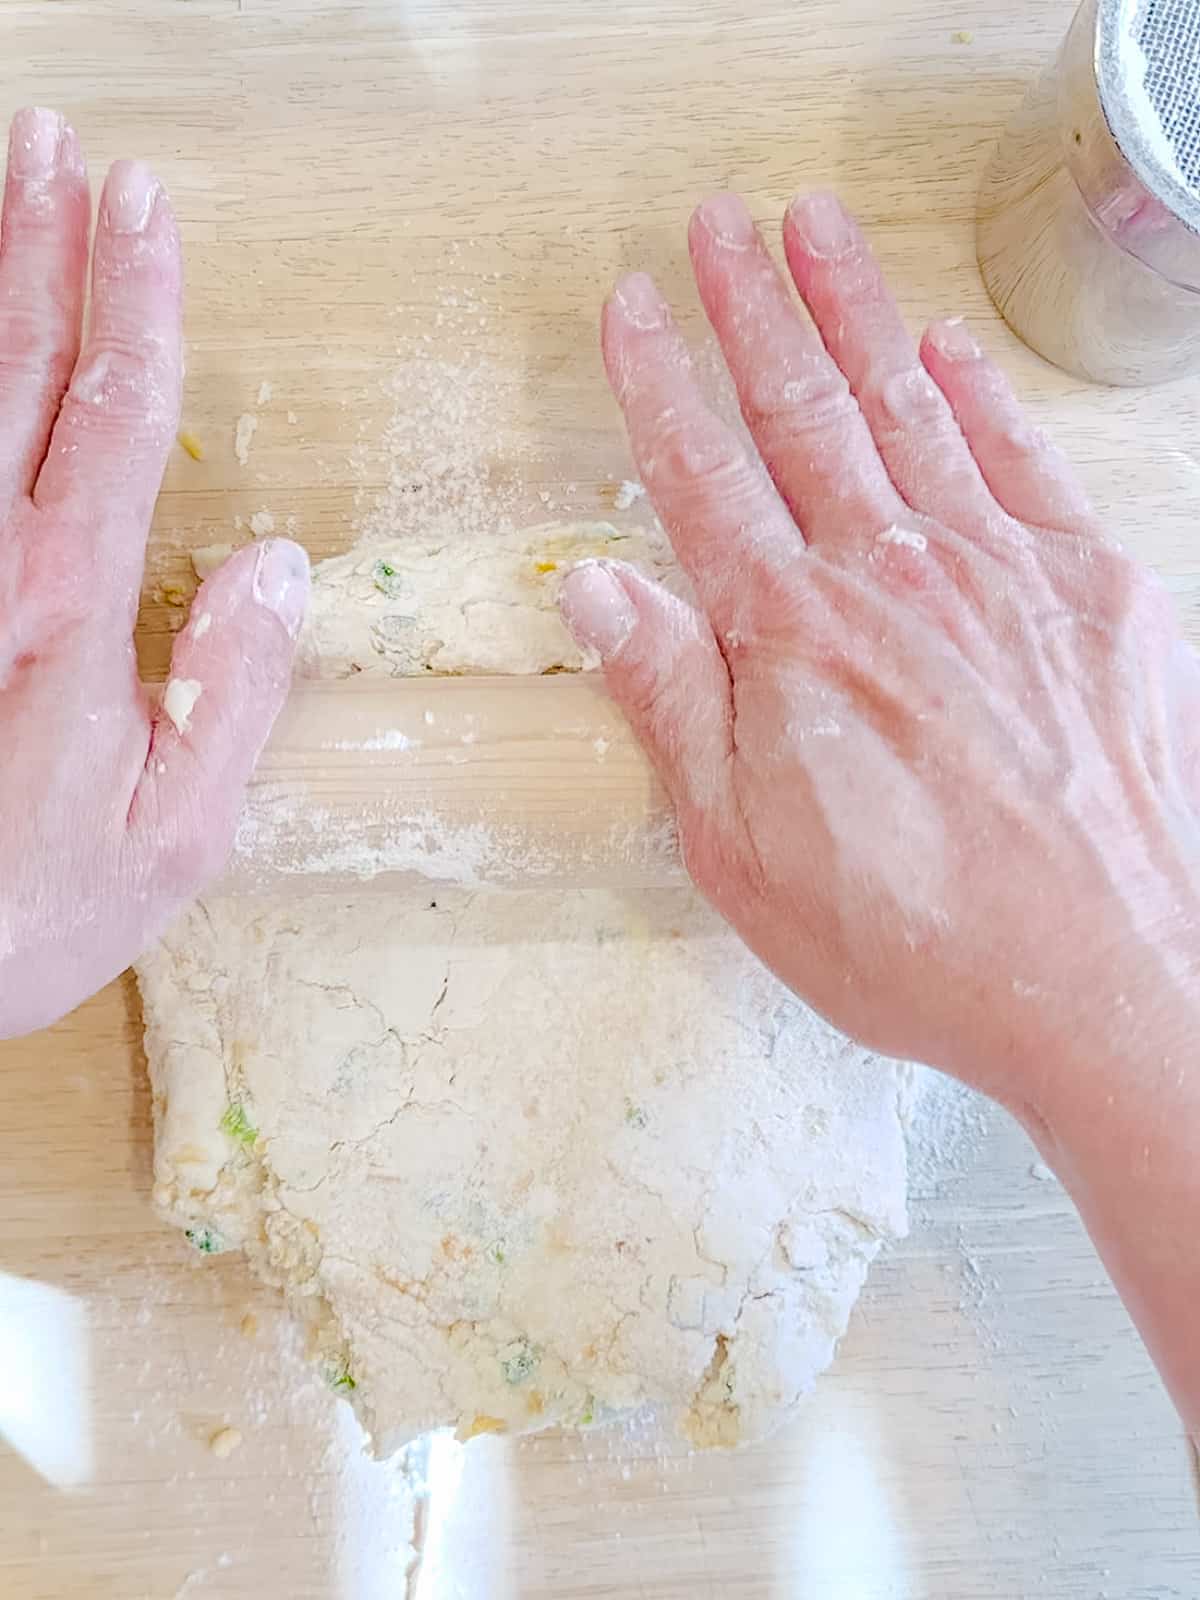 Rolling out jalapeno cheddar biscuit dough.